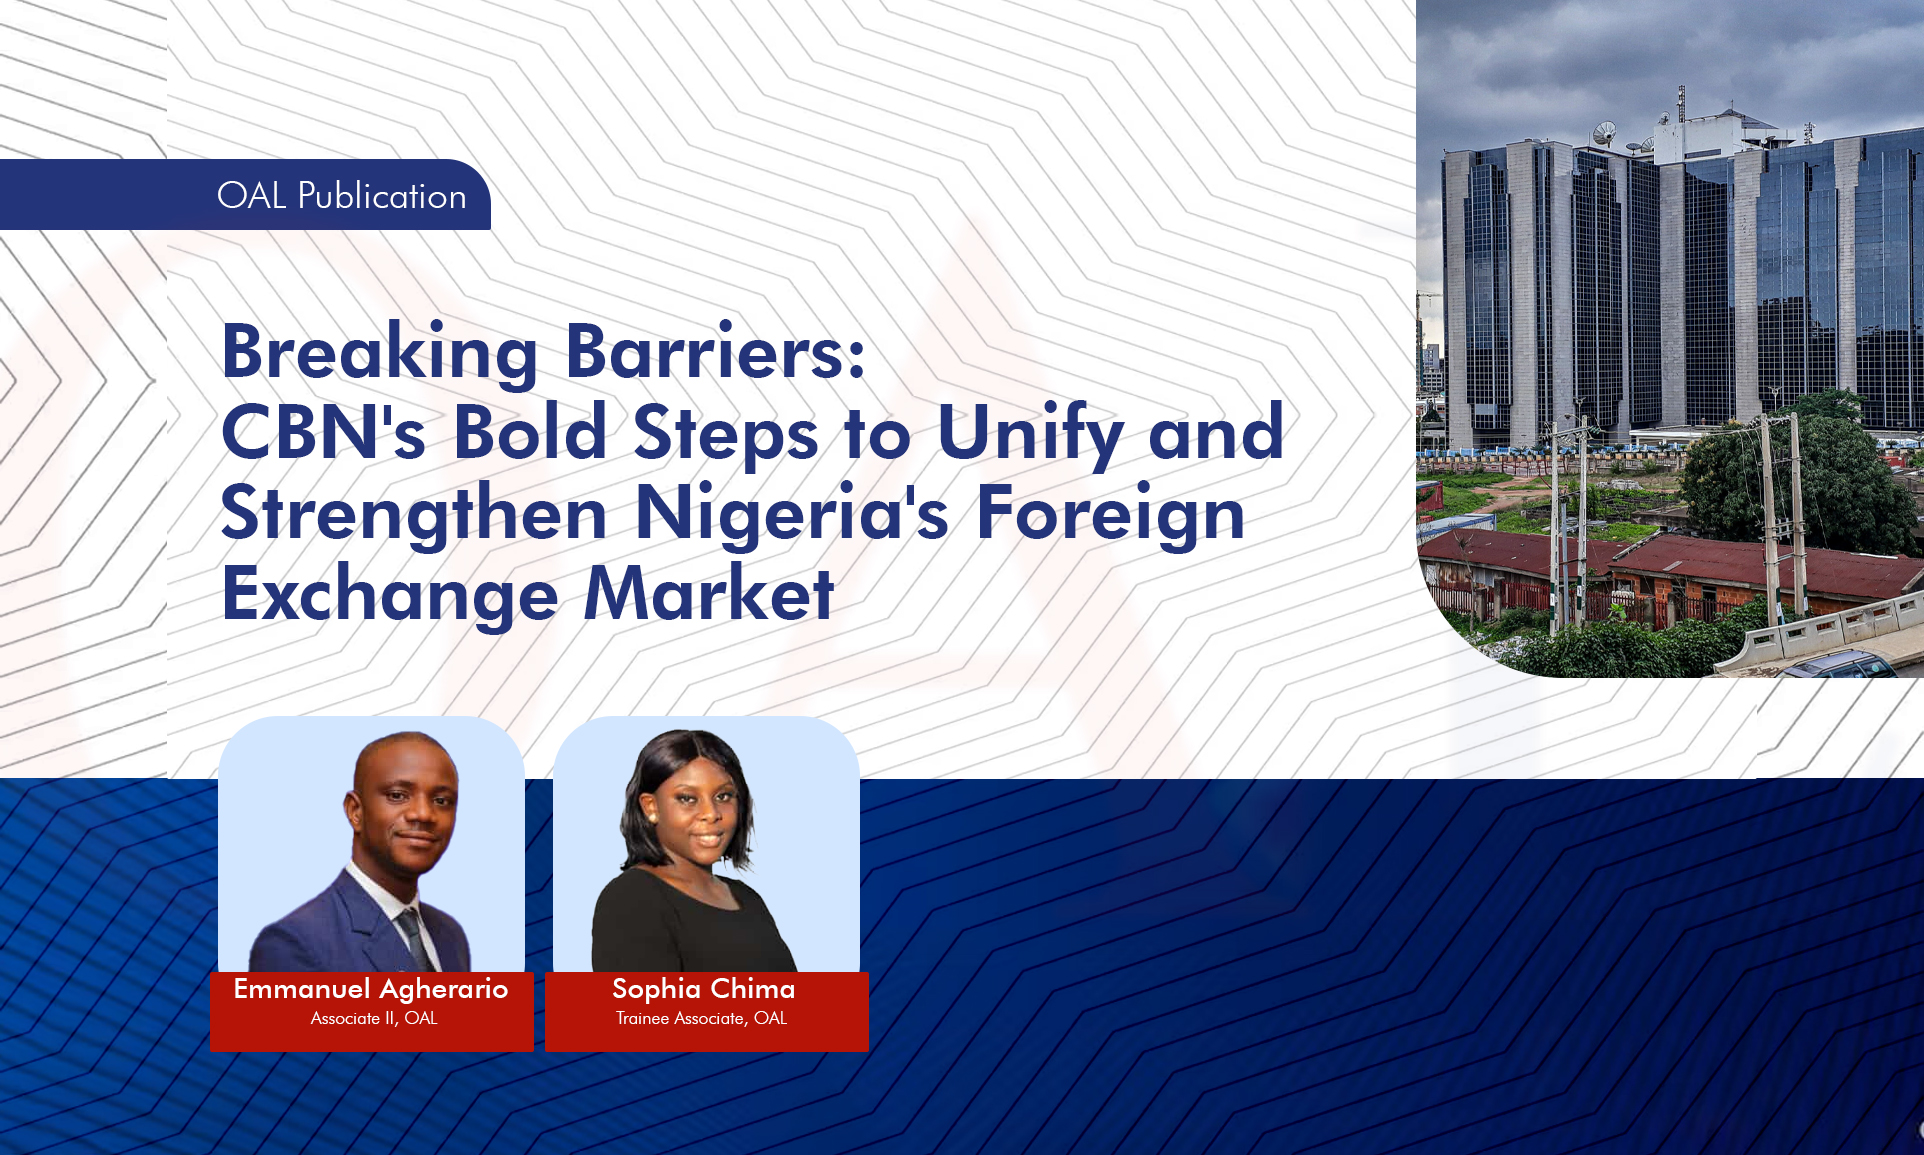 Breaking Barriers: CBN's Bold Steps to Unify and Strengthen Nigeria's Foreign Exchange Market.